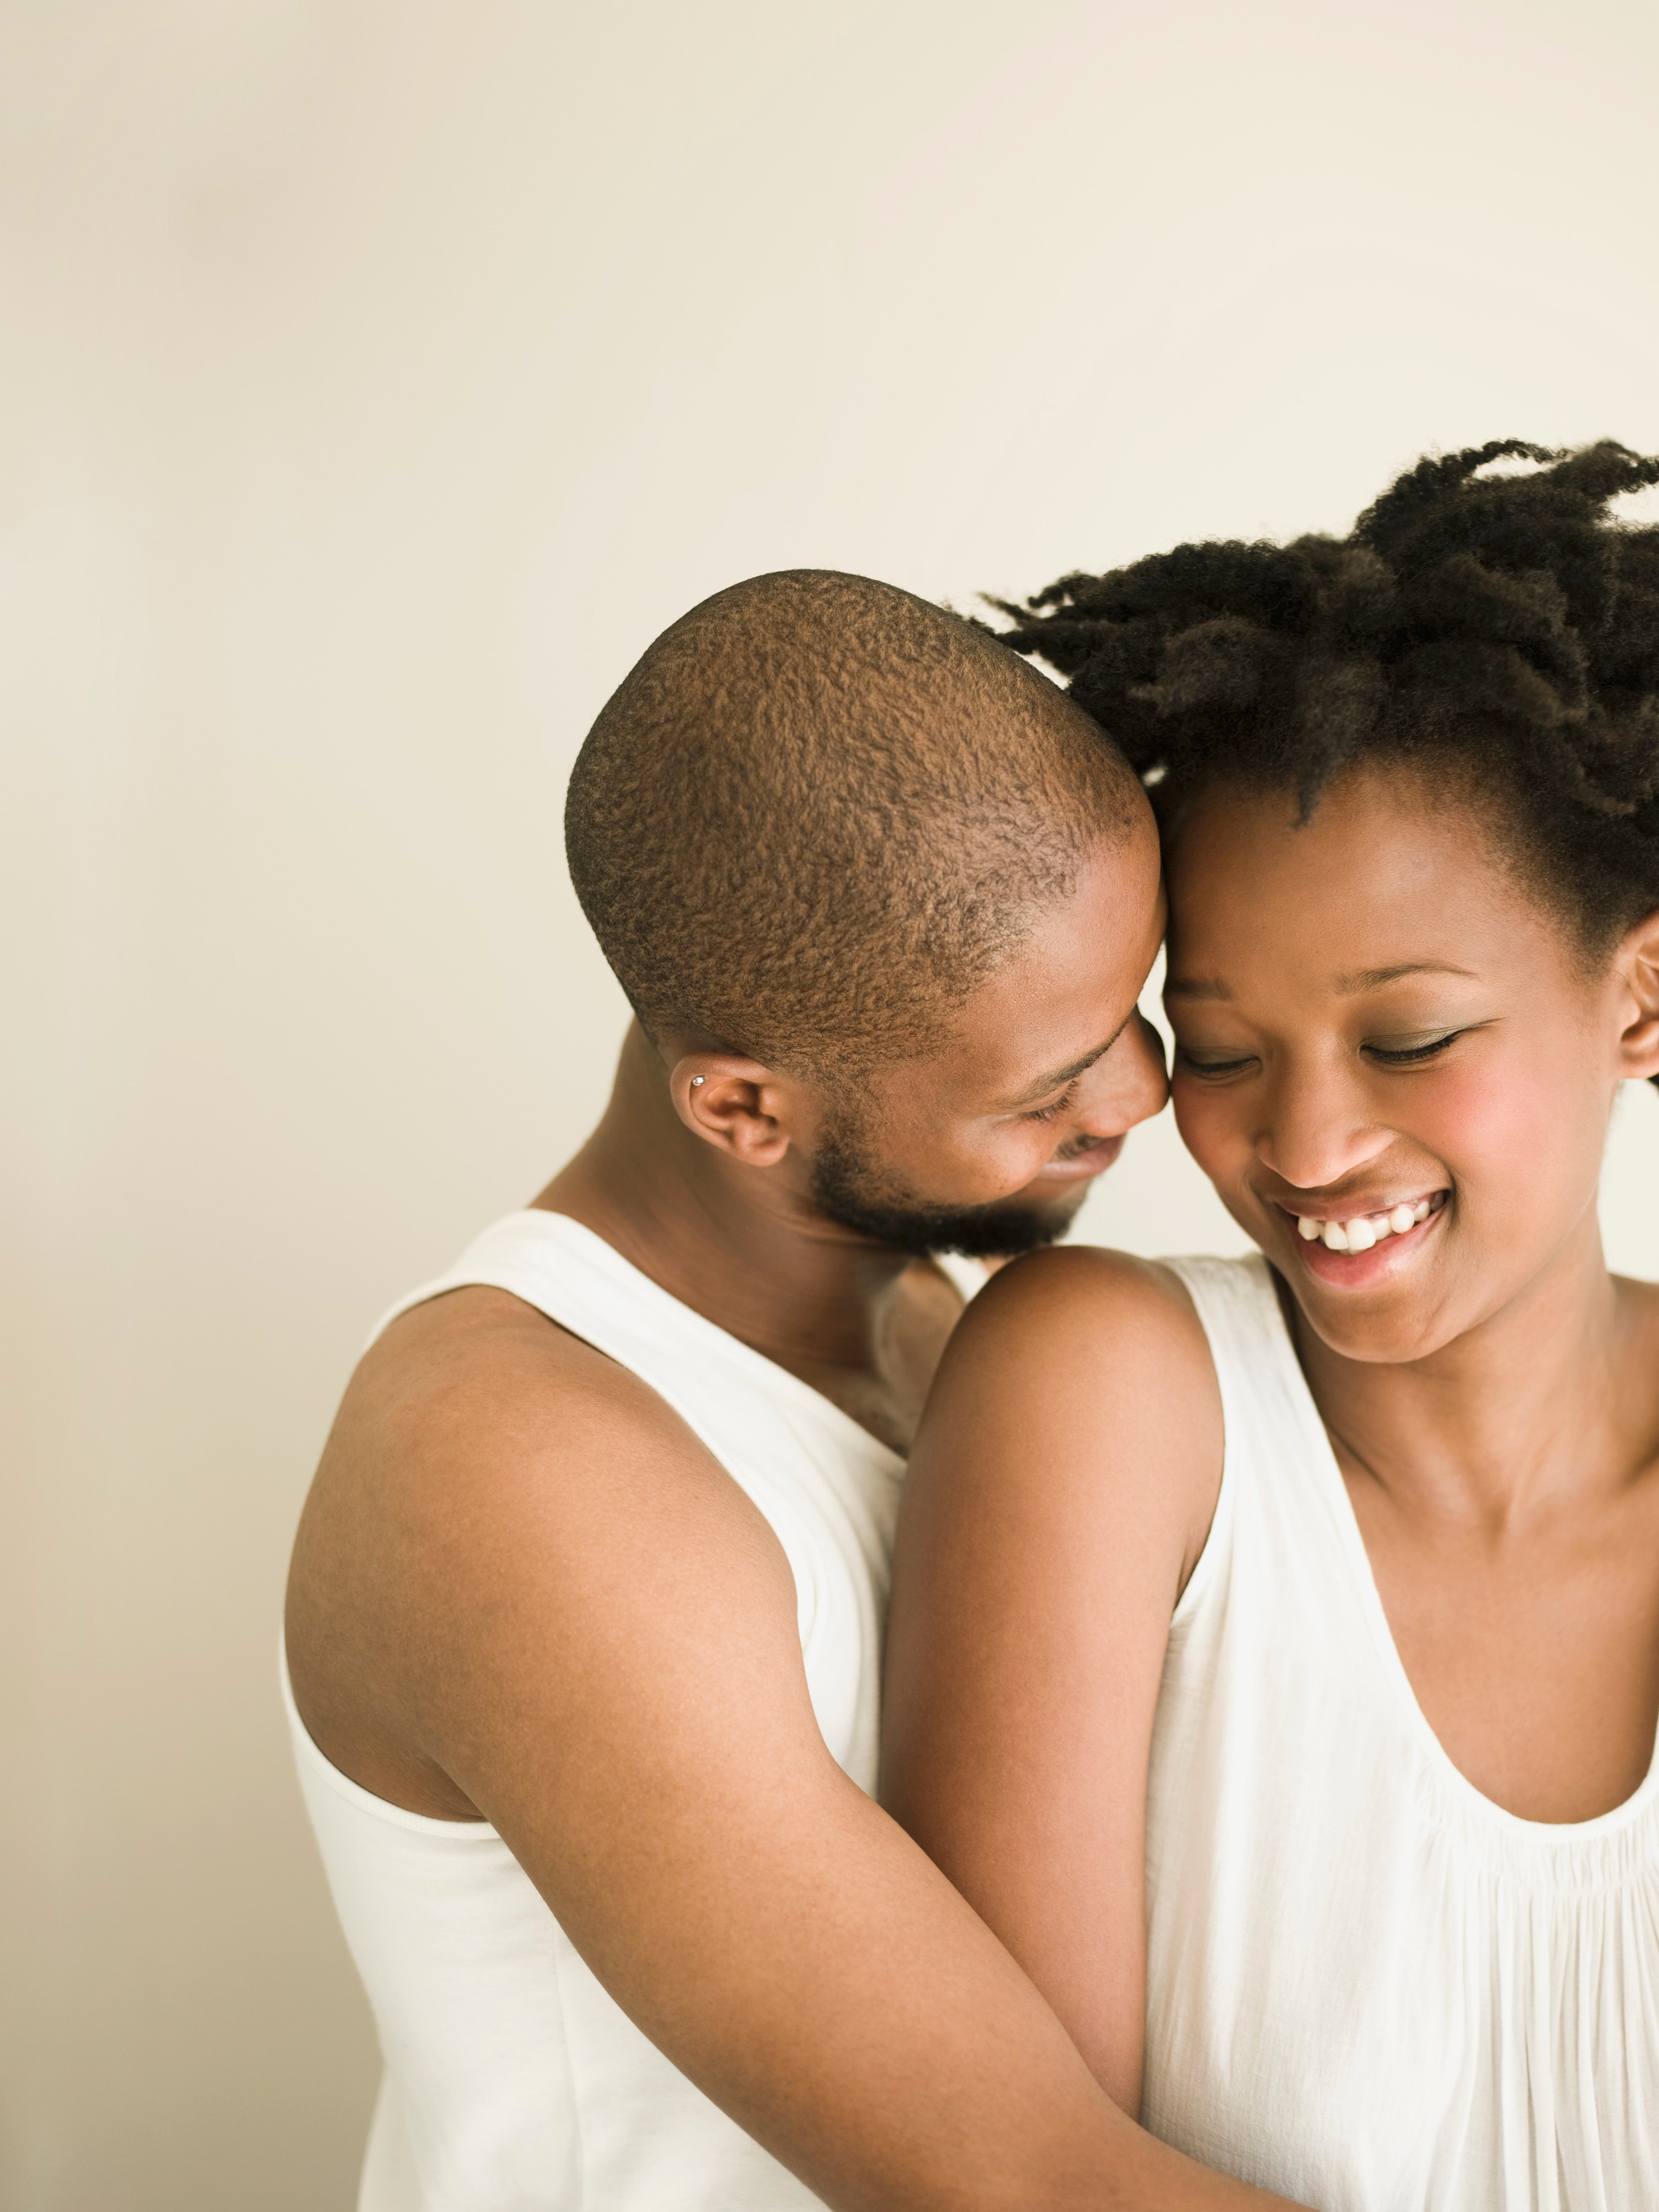 6 Surprising Facts About Men and Love